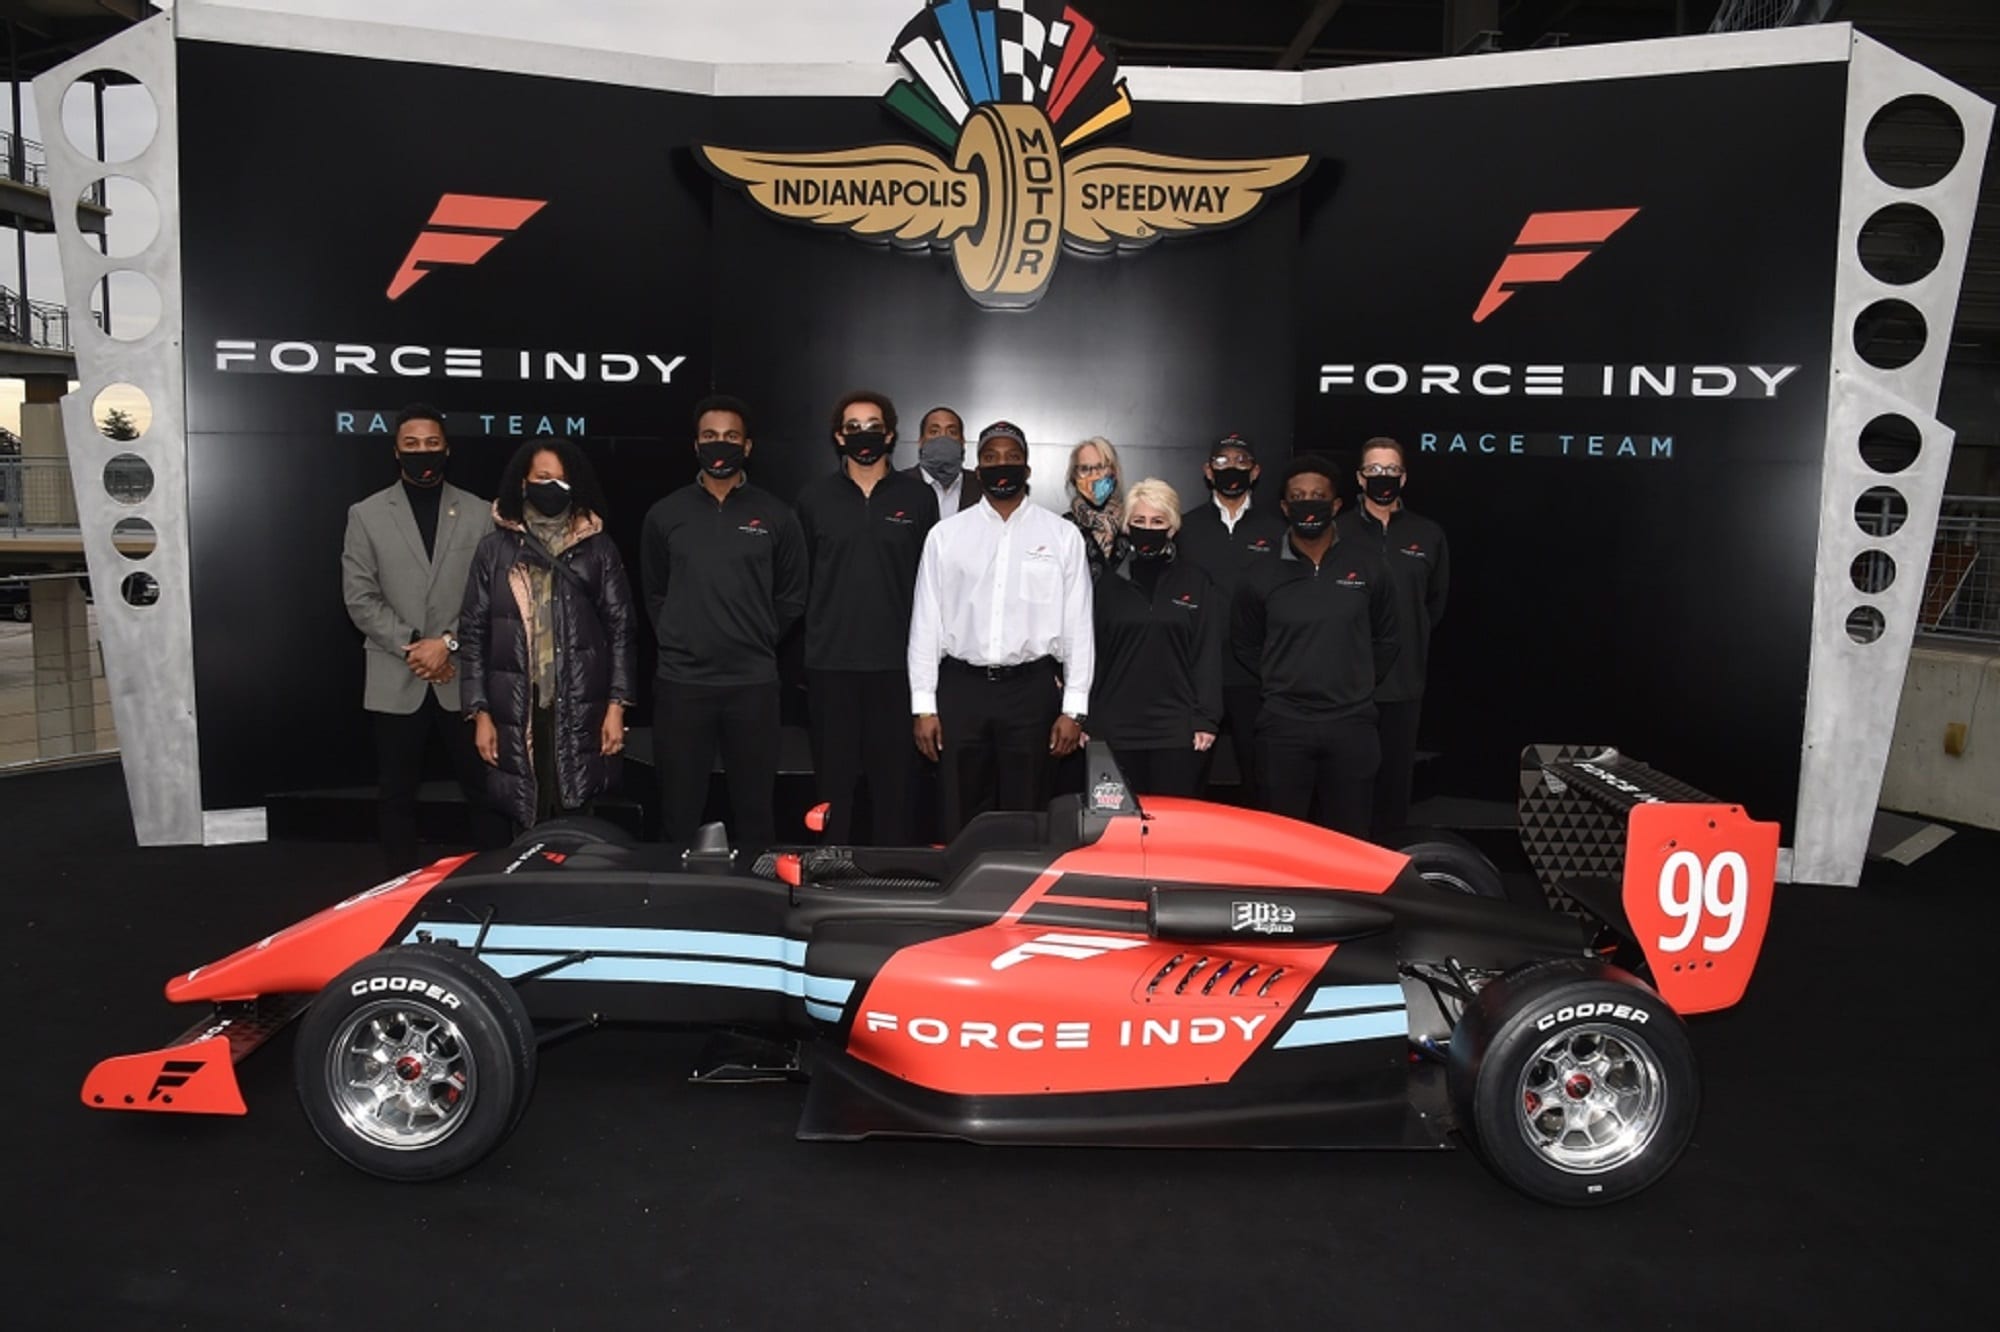 Force Indy 2021 Indy